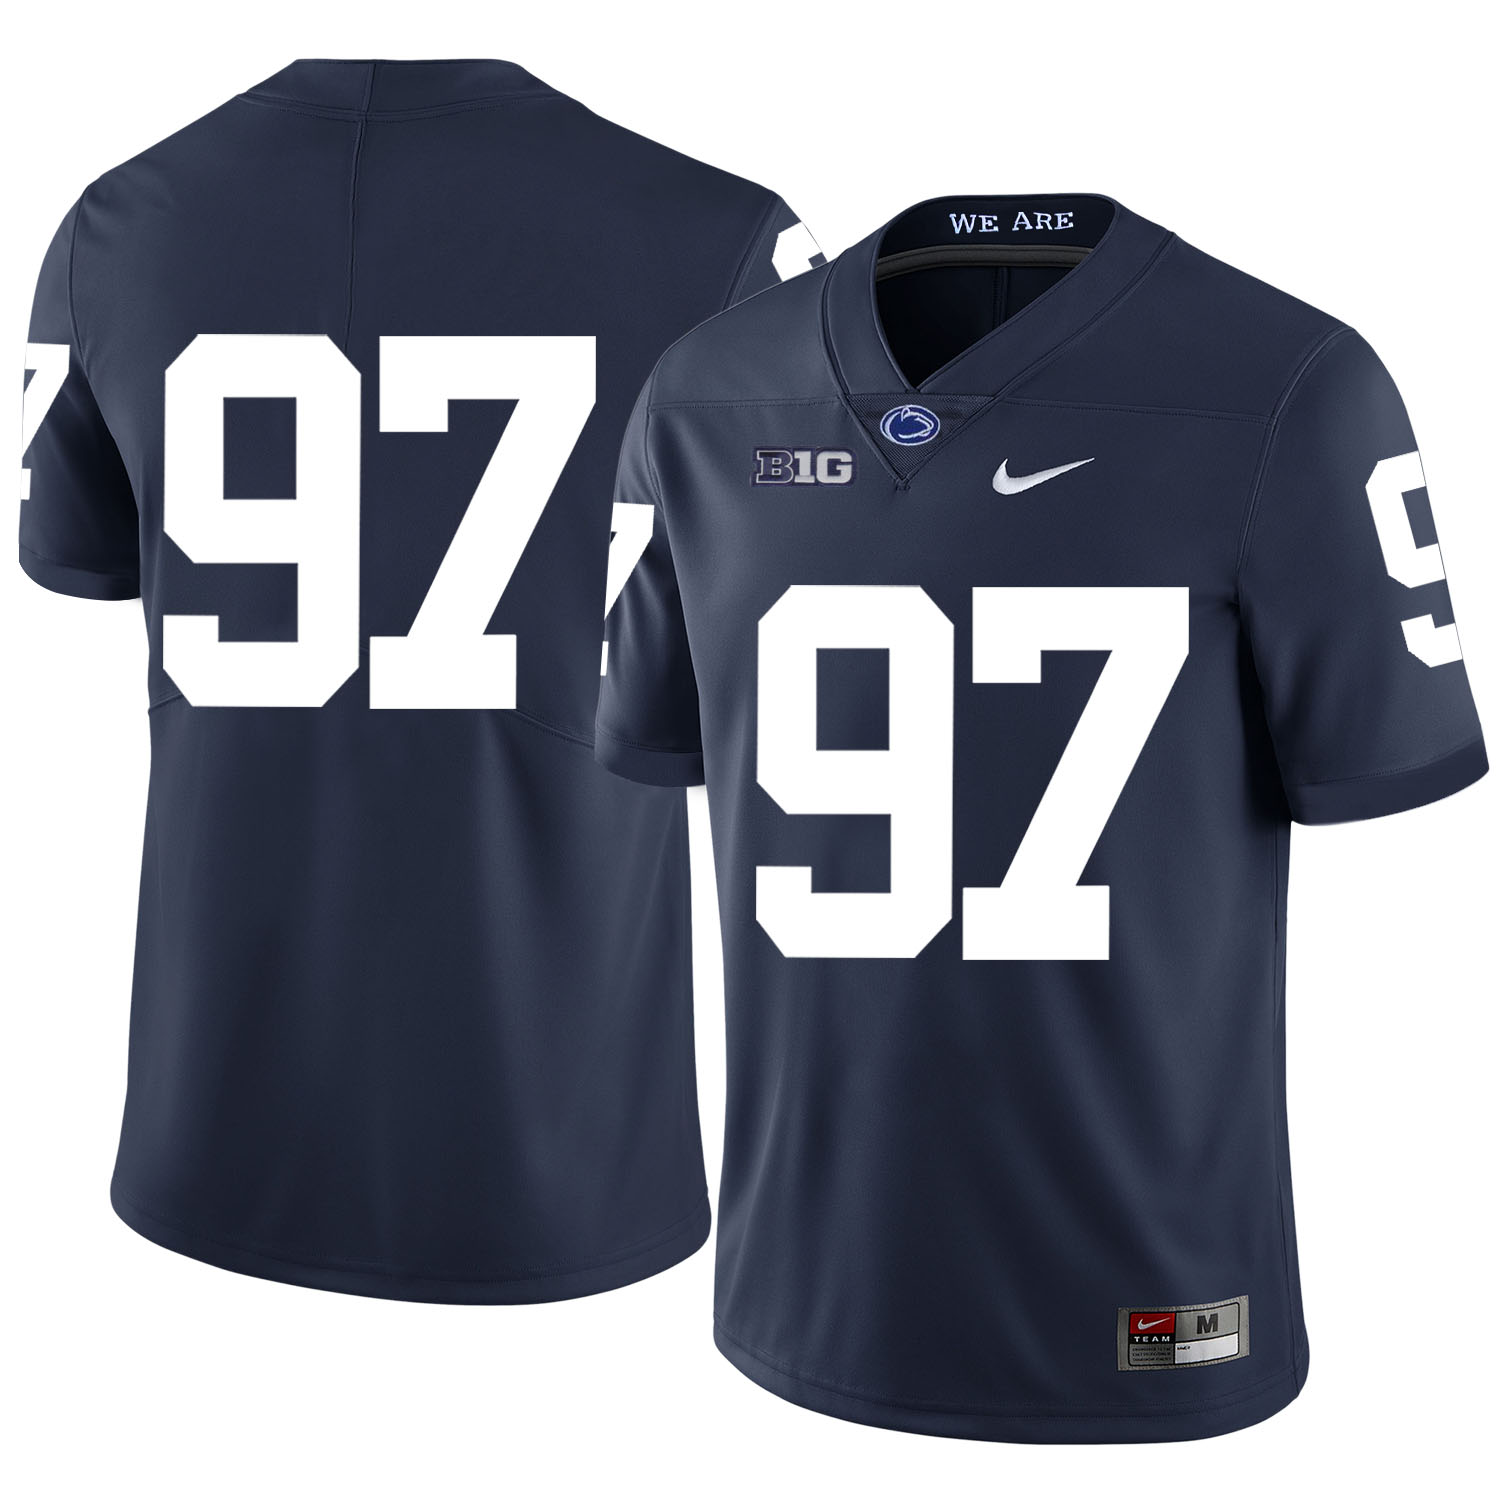 Penn State Nittany Lions 97 Sam Ficken Navy Nike College Football Jersey